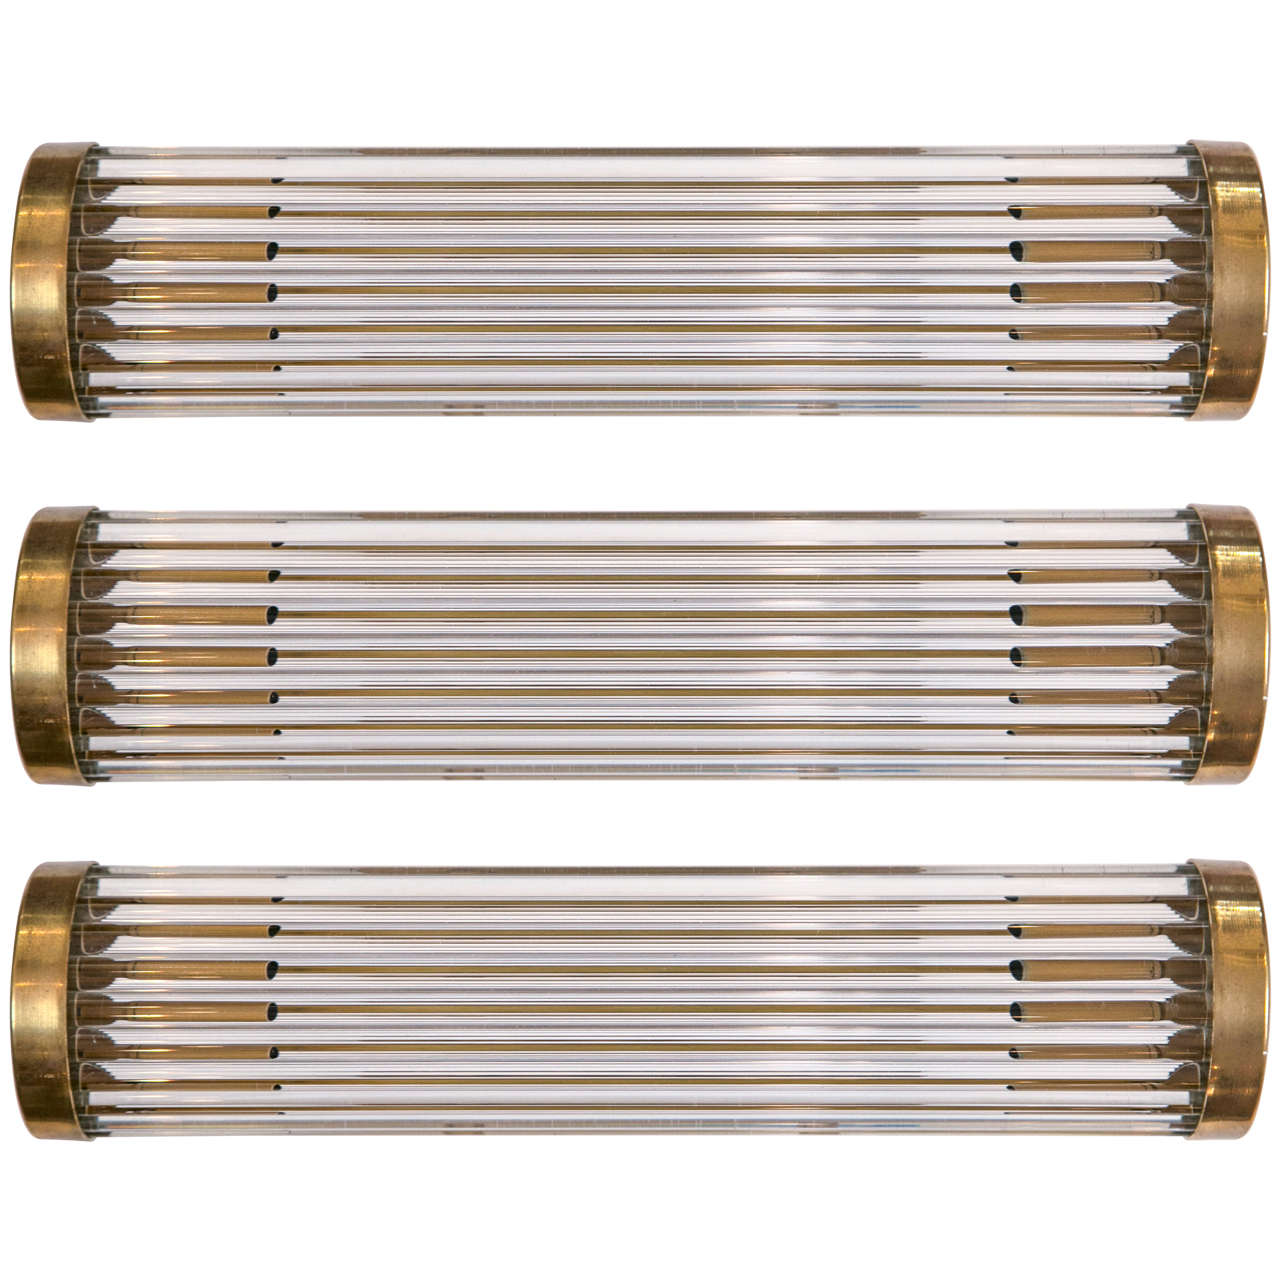 1 Classic wall light with straight arms in solid unlacquered brass and blown glass rods
for use as wall lights or even picture lights, newly made from a vintage model
Lamping: wired with US UL approved wiring and 2 quality brass sockets with